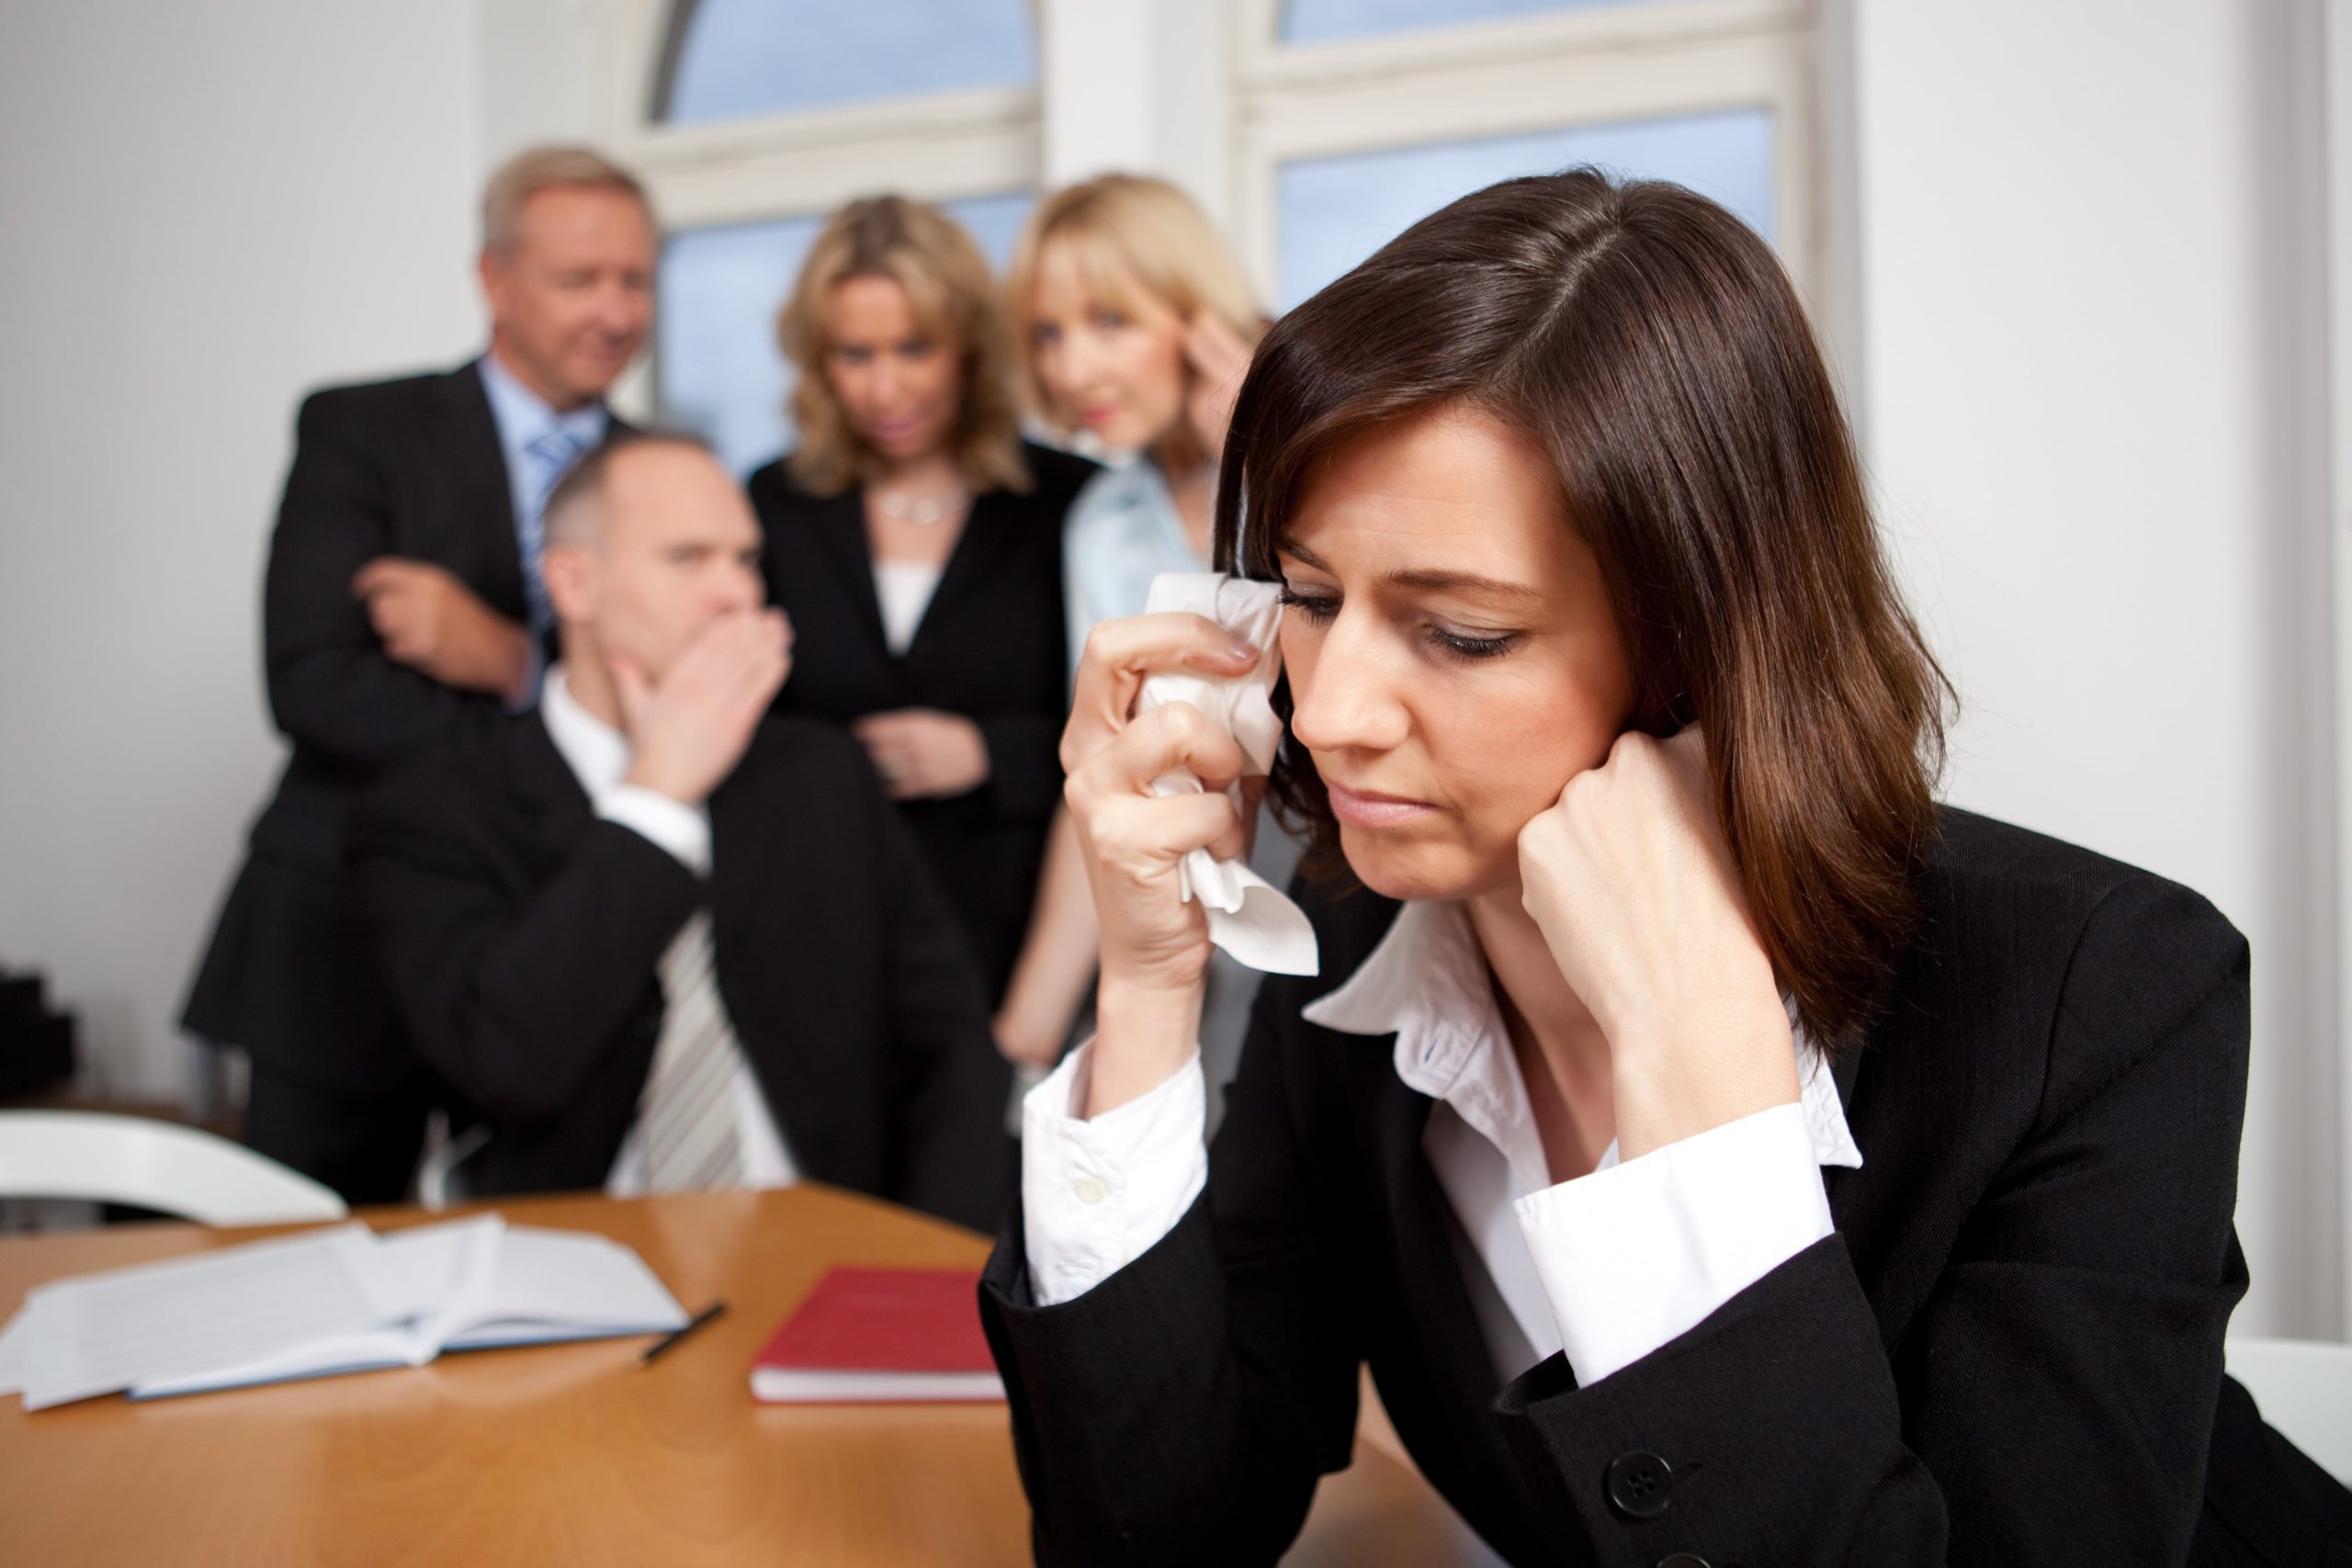 What Is Workplace Bullying and How Can You Stop It?